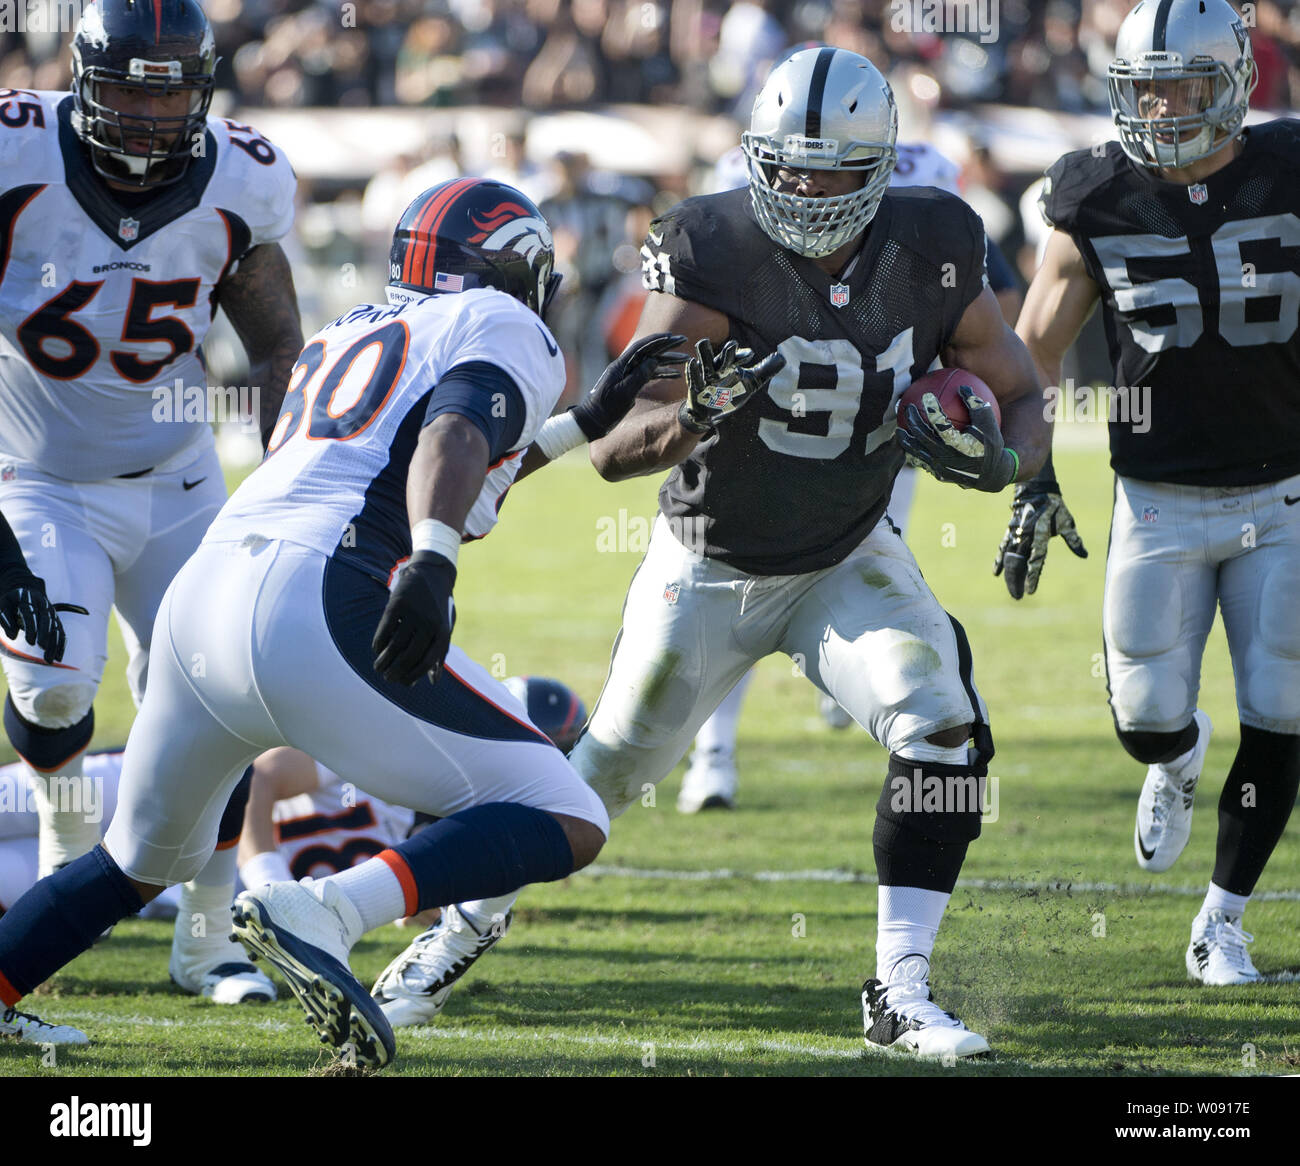 Oakland Raiders Justin Tuck (91) returns an intercepted pass by Denver Broncos Peyton Manning in the second quarter at O.co Coliseum in Oakland, California on November 9, 2014. The Broncos defeated the winless Raiders 41-17.     UPI/Terry Schmitt Stock Photo